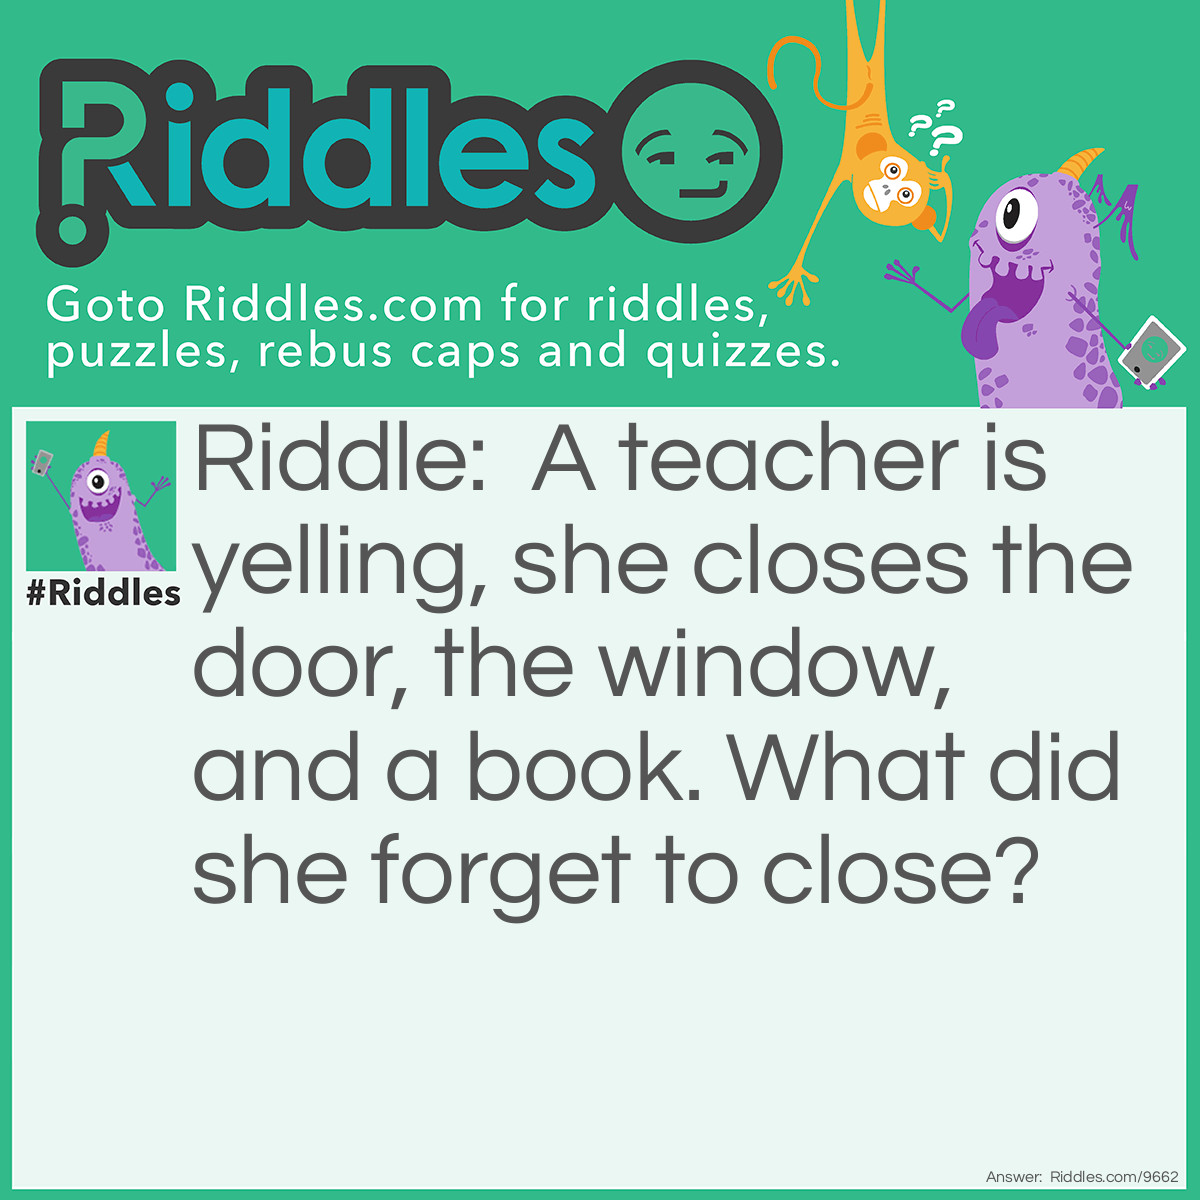 Riddle: A teacher is yelling, she closes the door, the window, and a book. What did she forget to close? Answer: Her mouth.